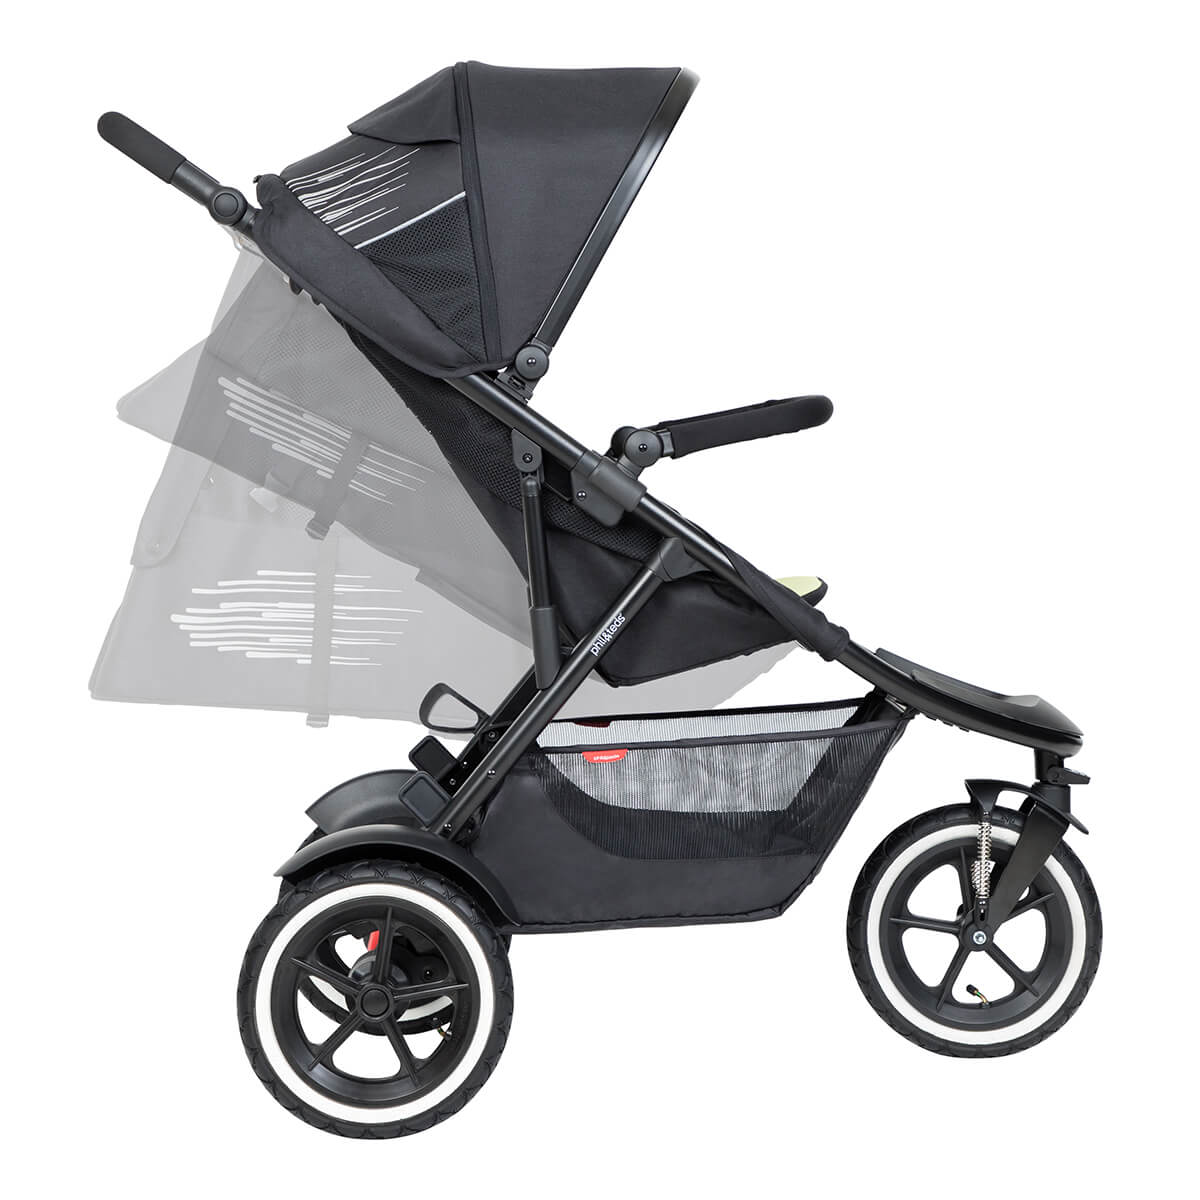 https://cdn.accentuate.io/7921432133810/19437753335986/philteds-sport-buggy-can-recline-in-multiple-angles-including-full-recline-for-newborn-baby-v1706737894003.jpg?1200x1200